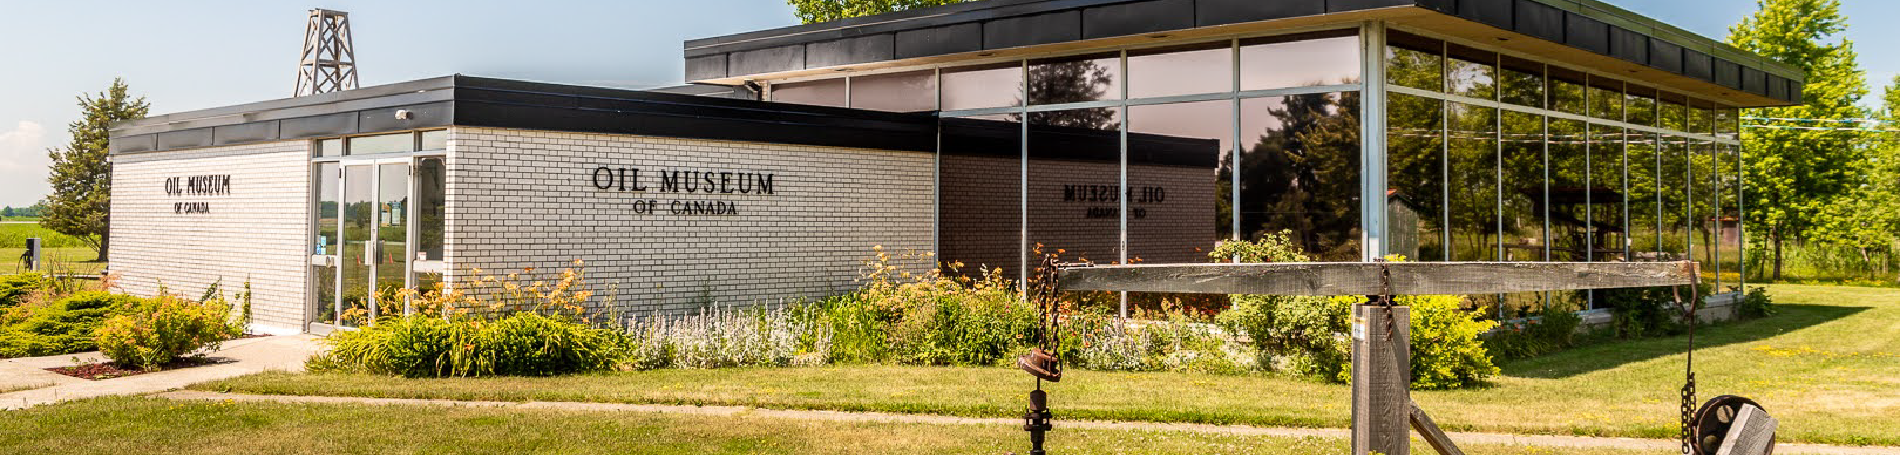 Exterior of the Oil Museum of Canada